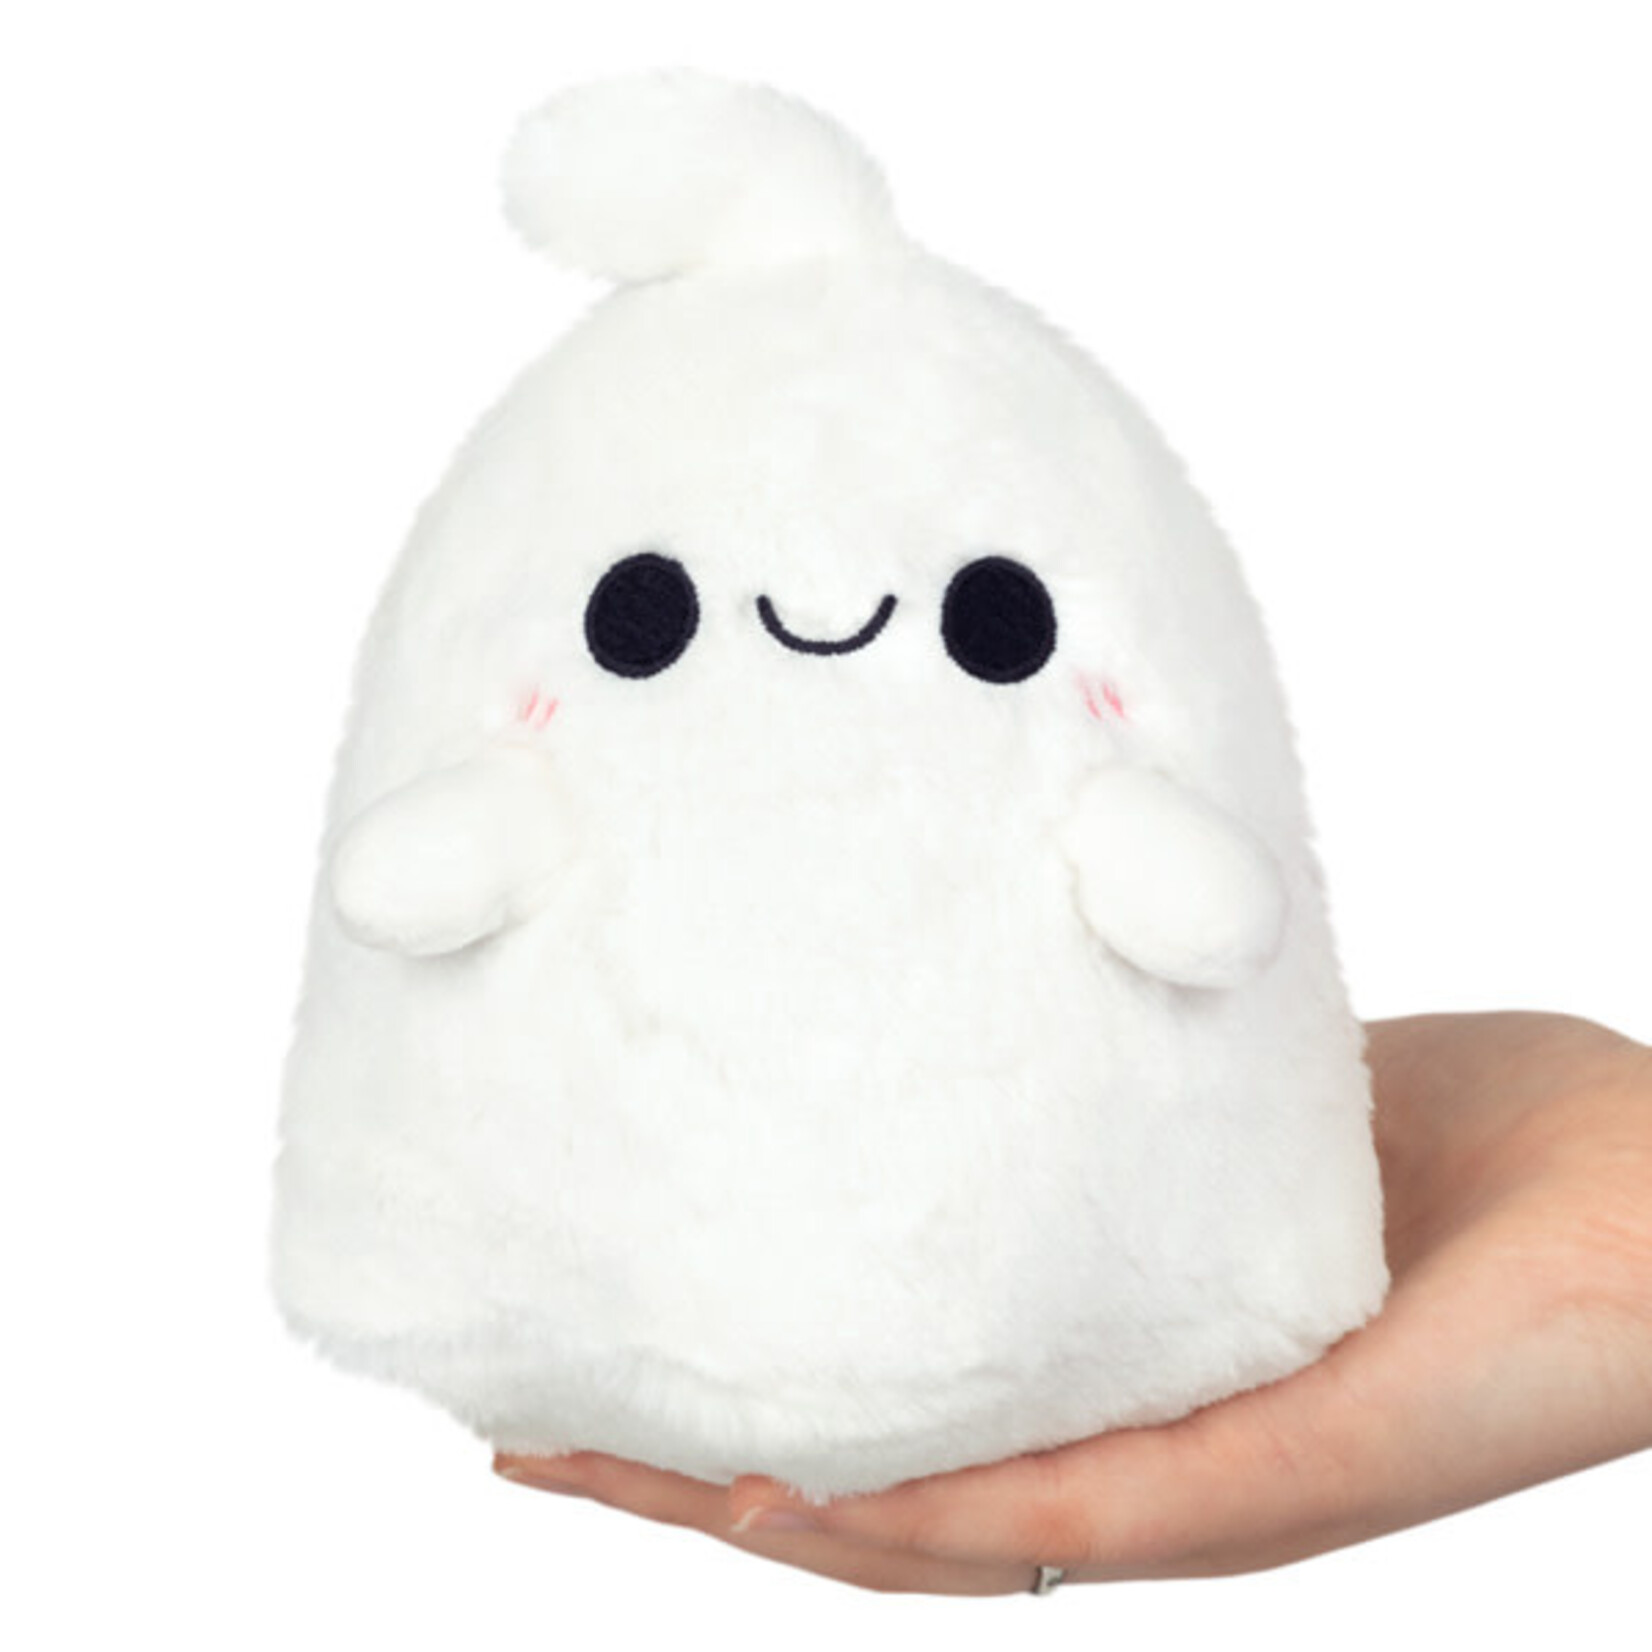 Squishable Snacker Spooky Ghost